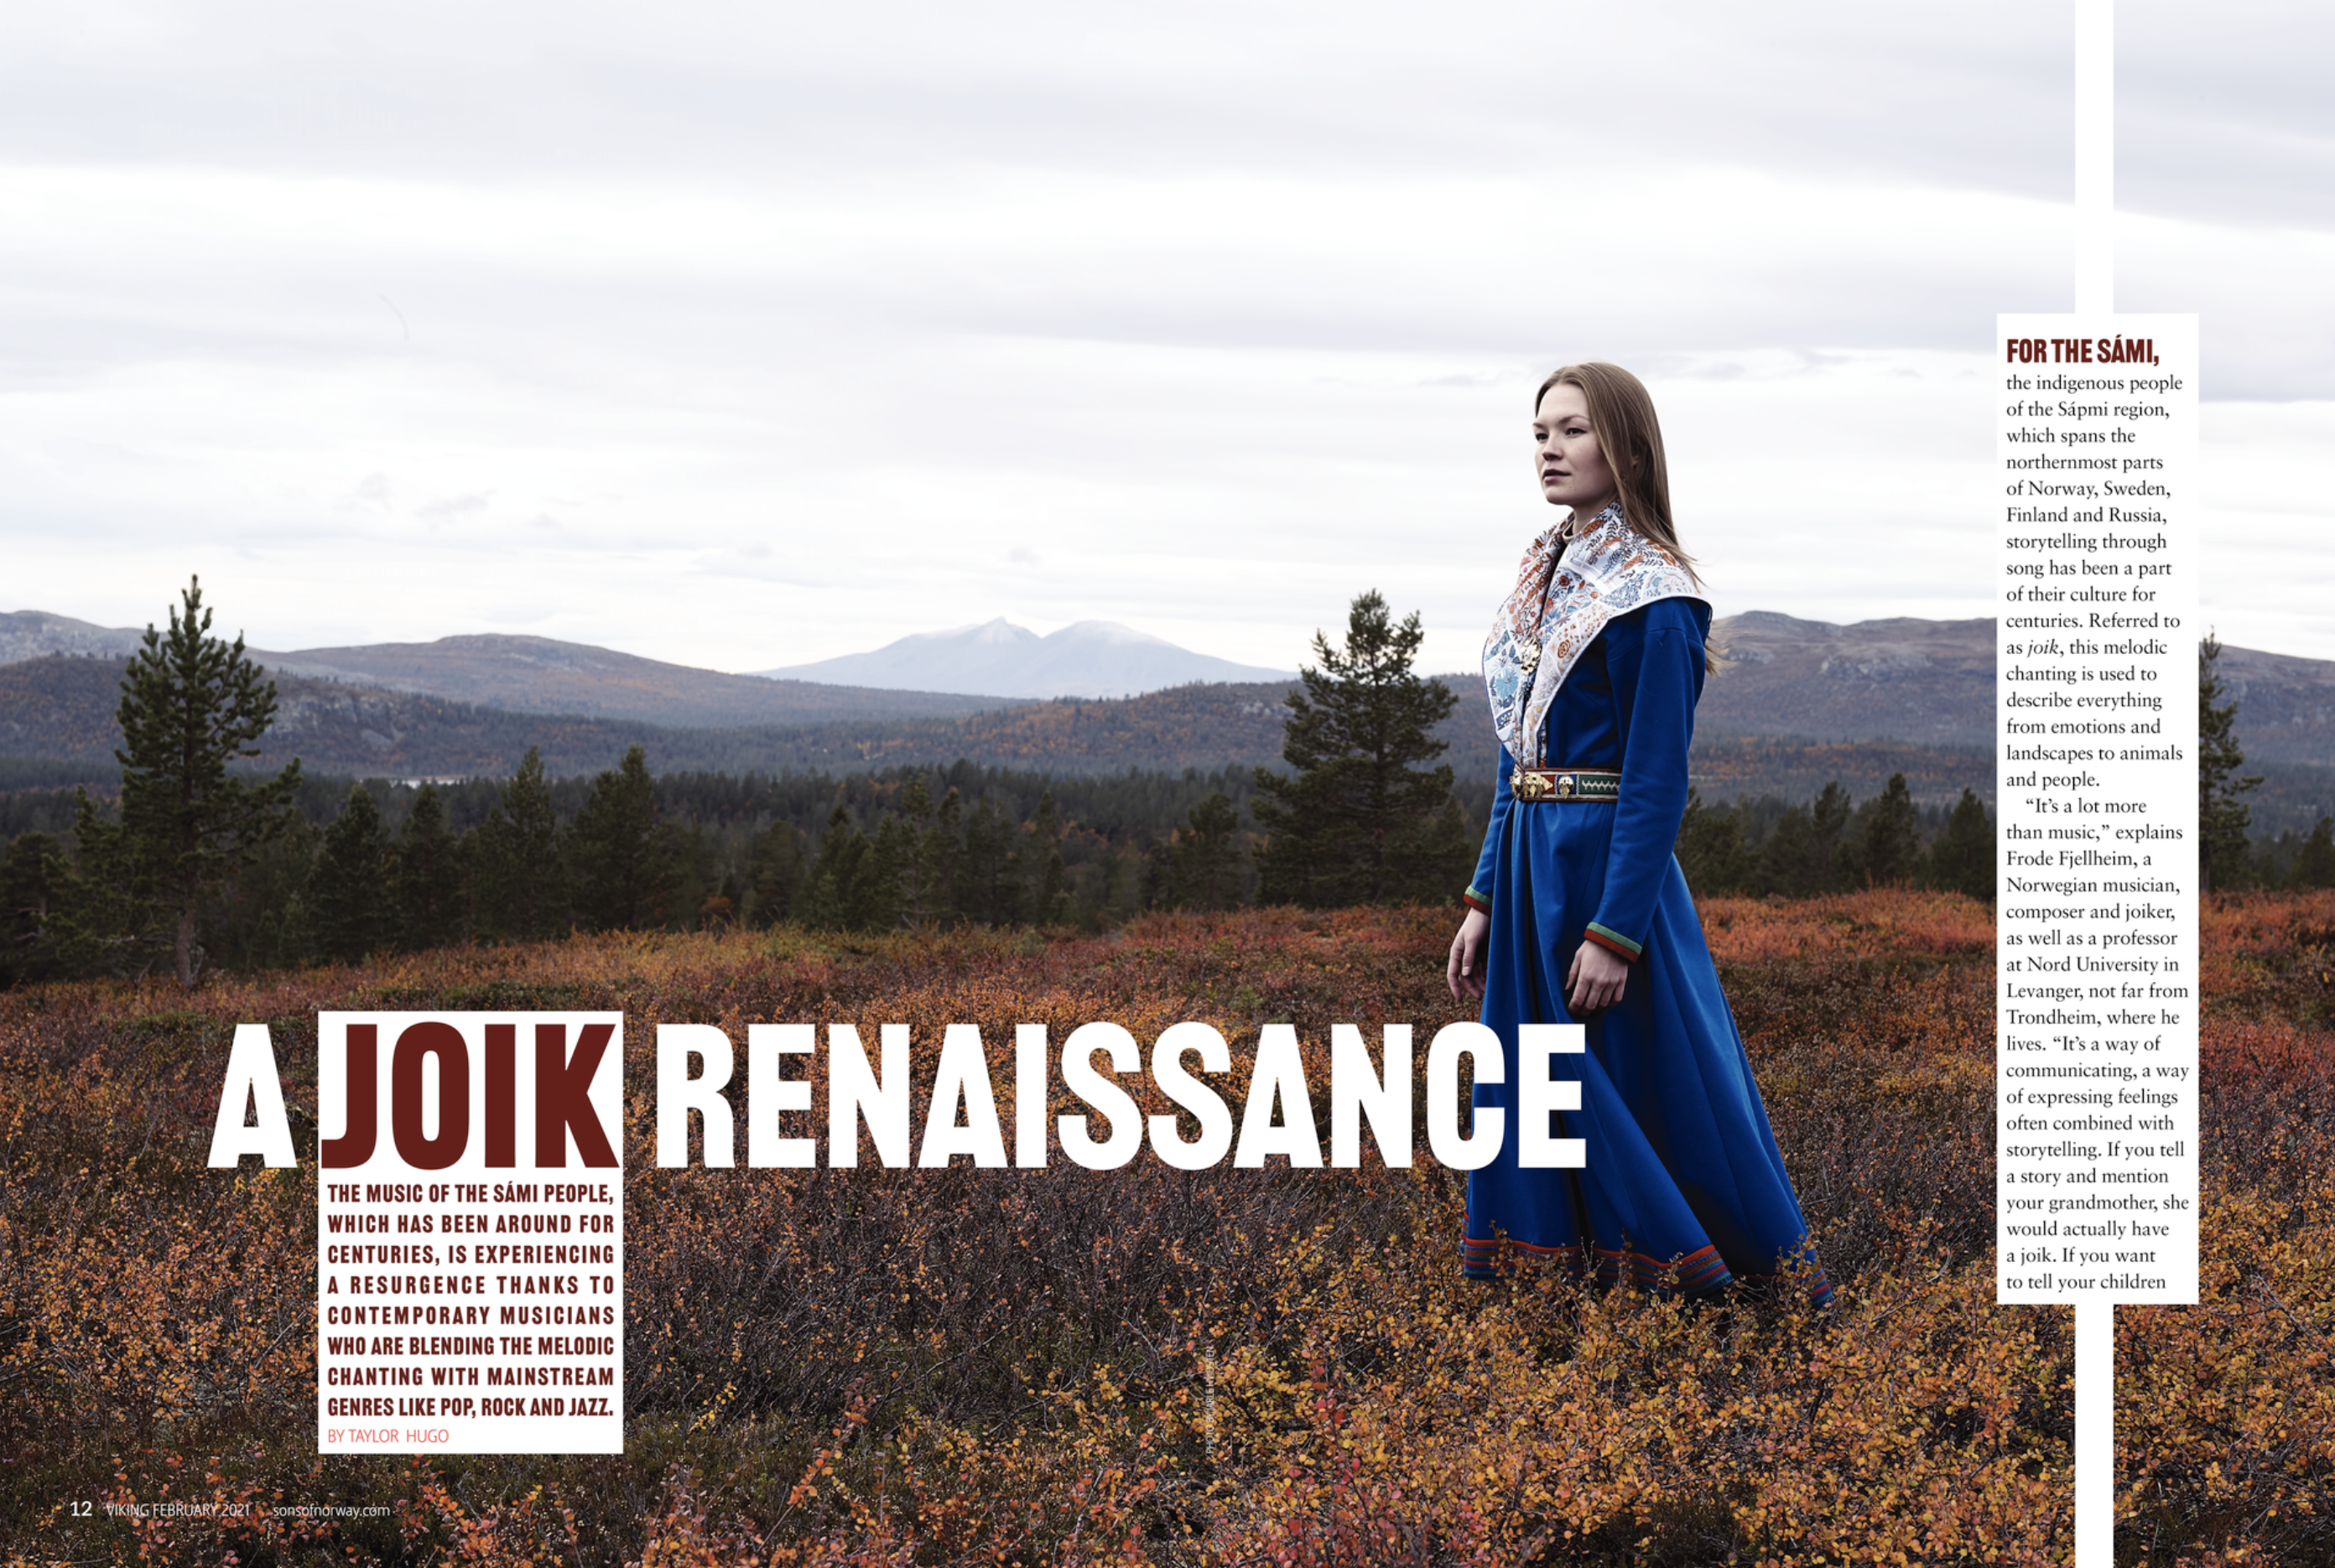 feature image of Viking magazine, Feb. 2021. A Sámi woman standing in a field, wearing a traditional costume.